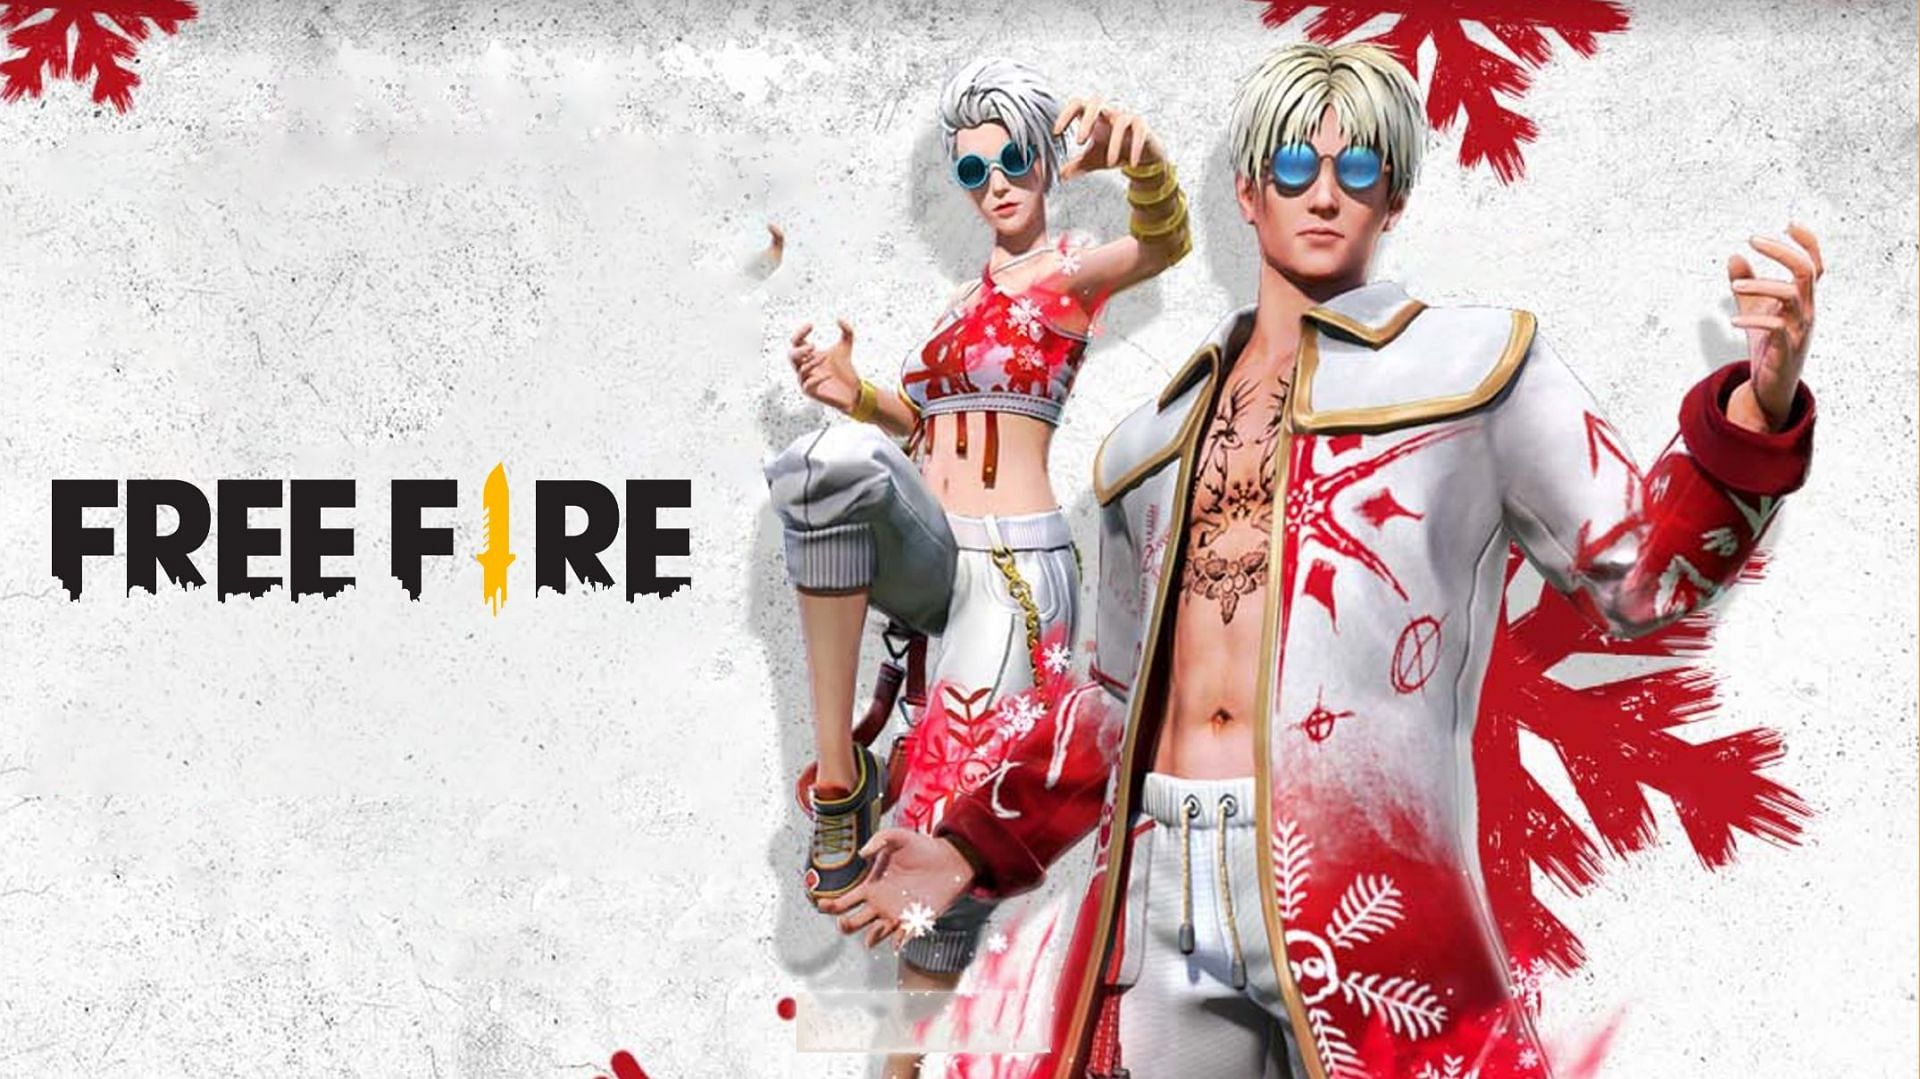 The new Mystery Shop provides two bundles as the grand prize Image via Free Fire)